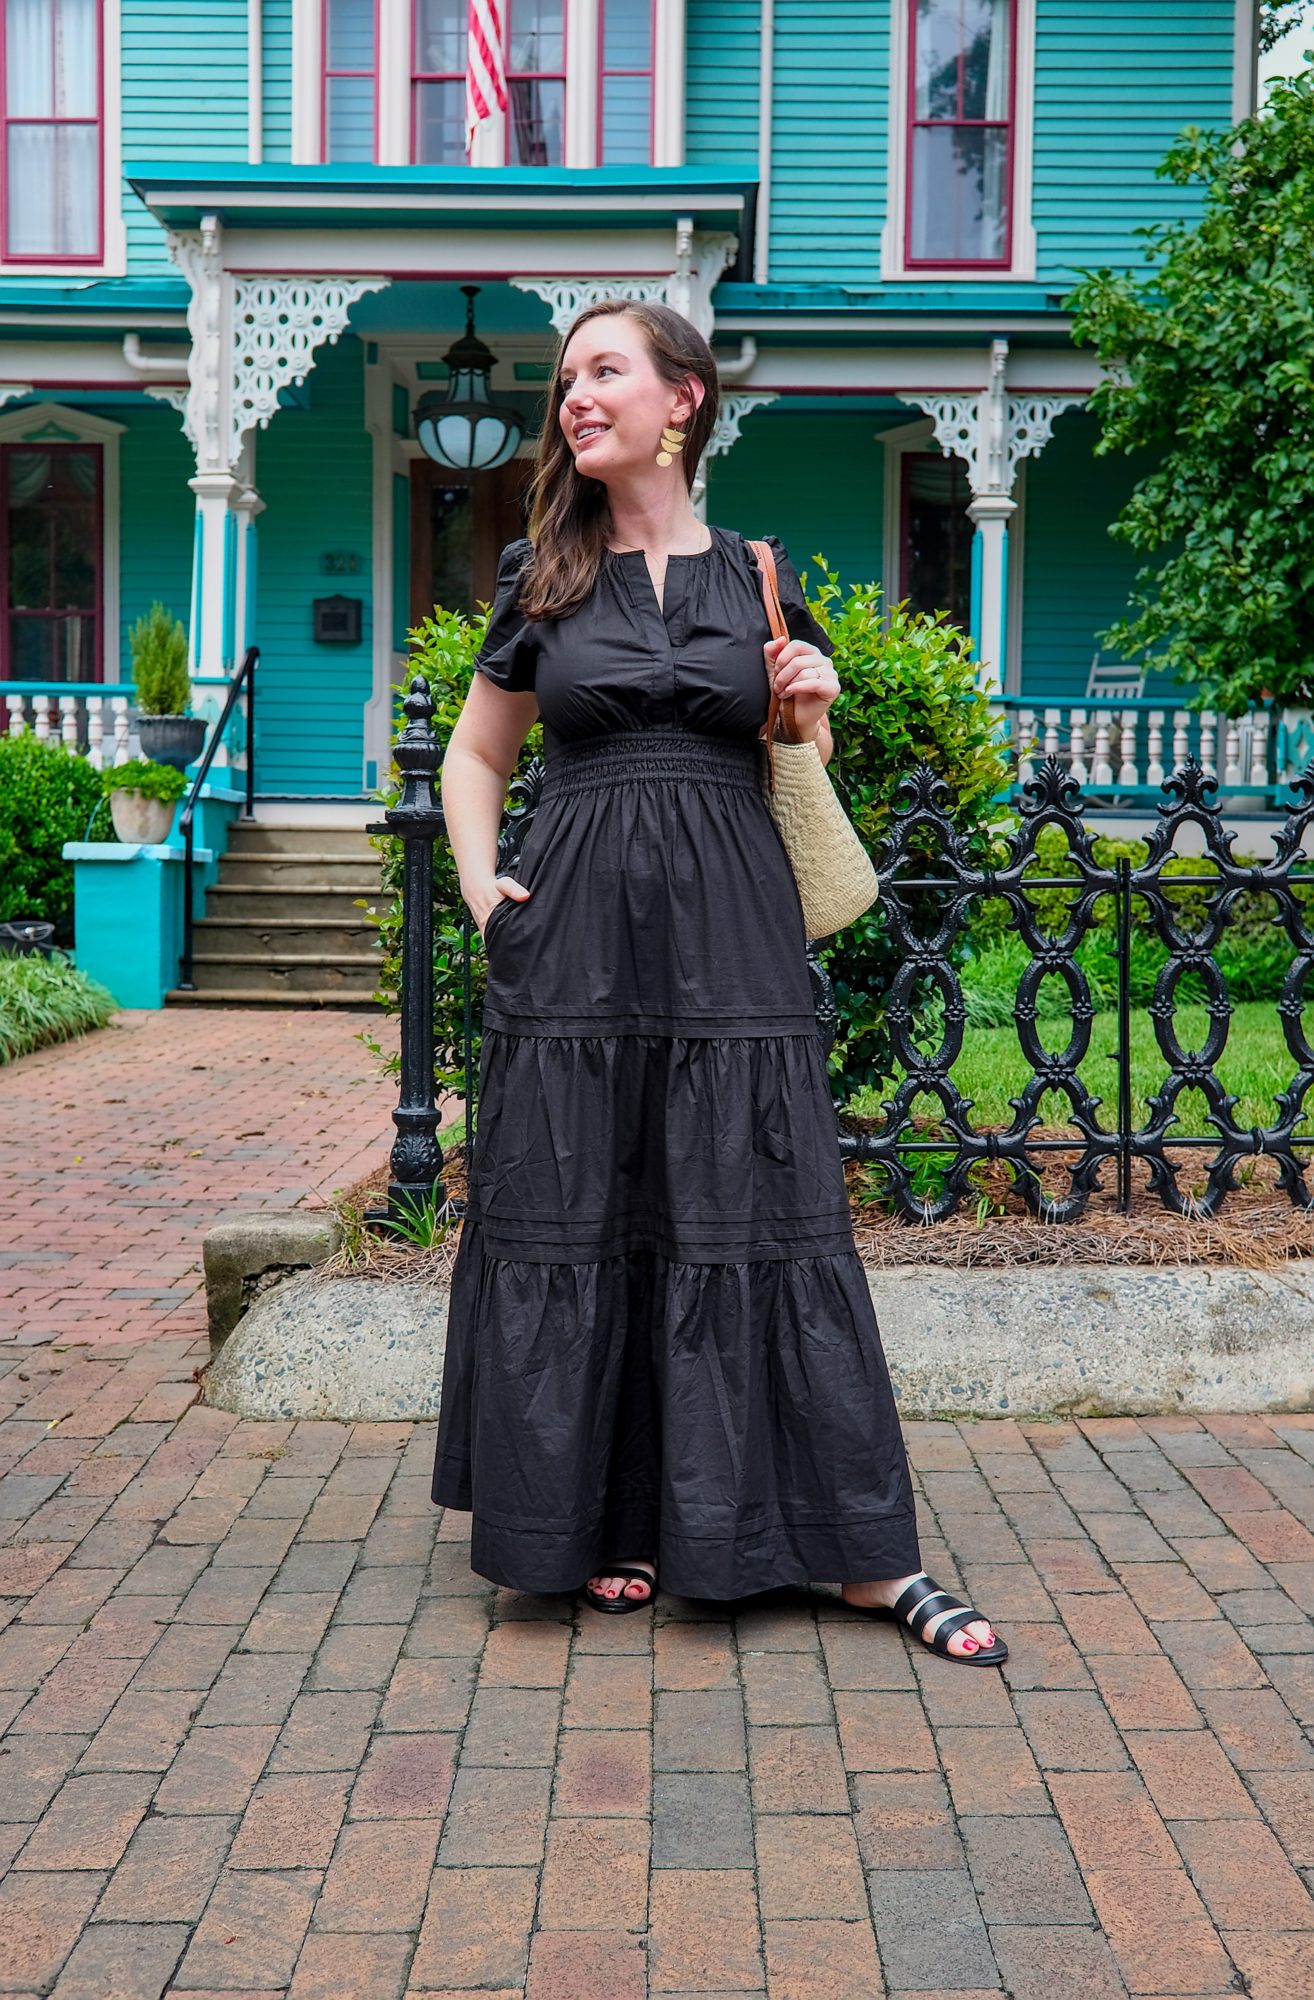 Alyssa wears the Quince Cotton Poplin Maxi Dress in black and stands in front of a Victorian home